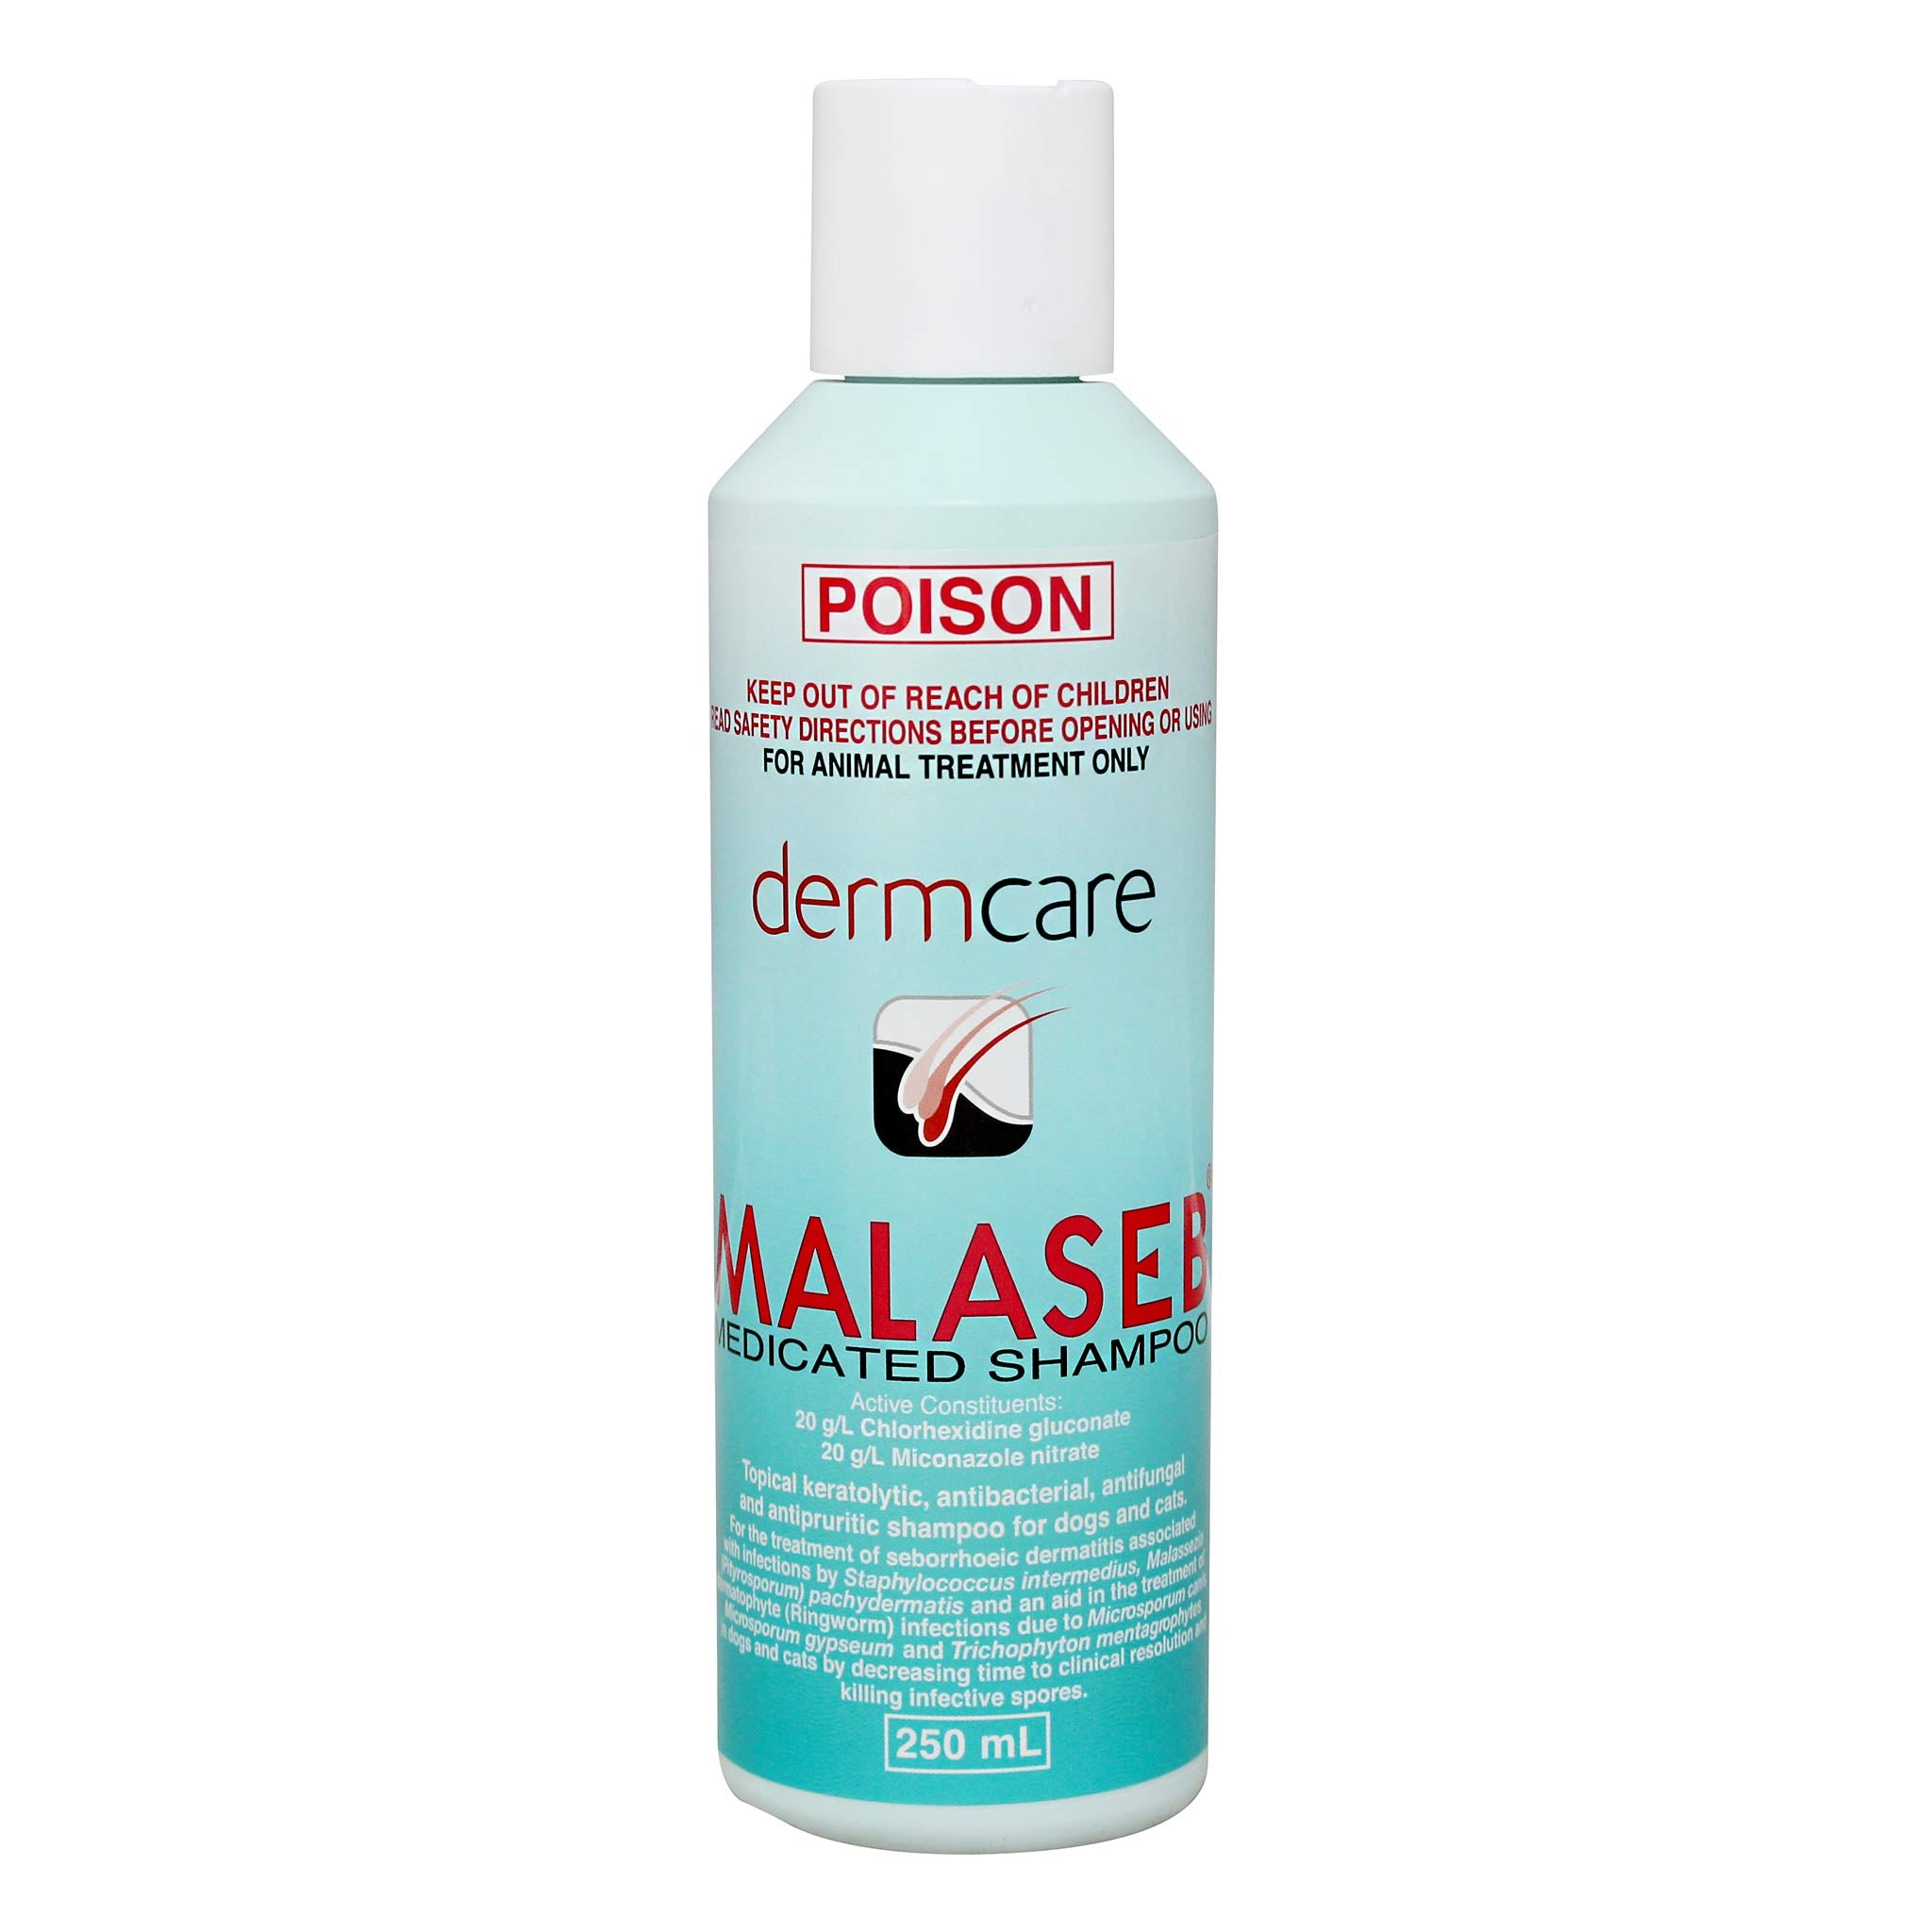 malaseb wash for dogs